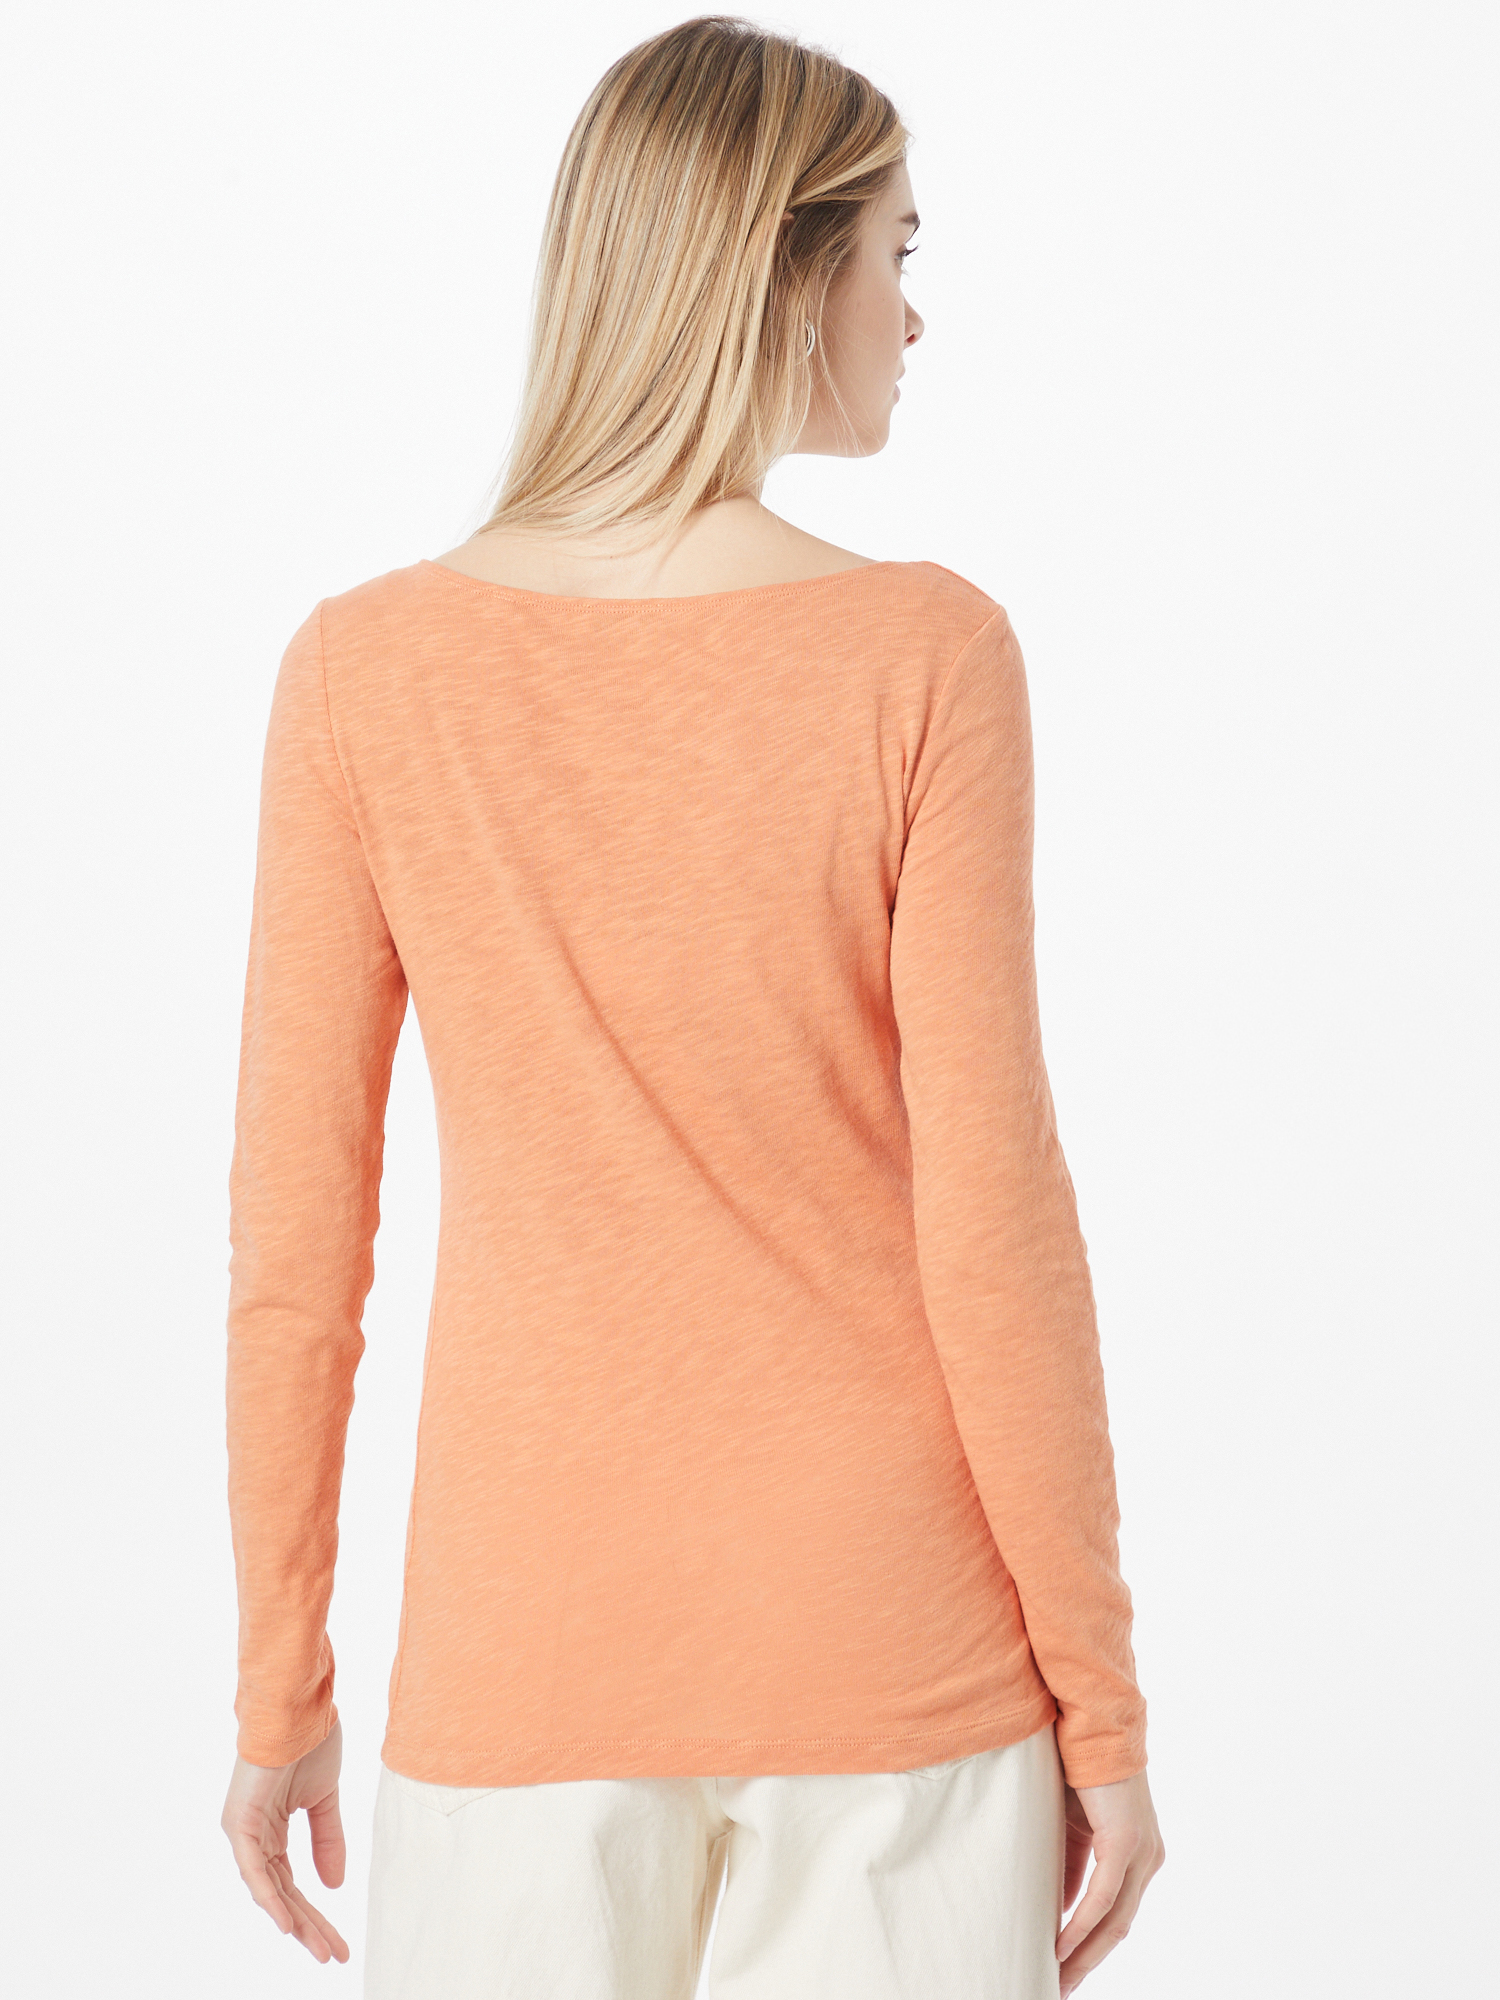 Marc OPolo T-Shirt in Apricot 